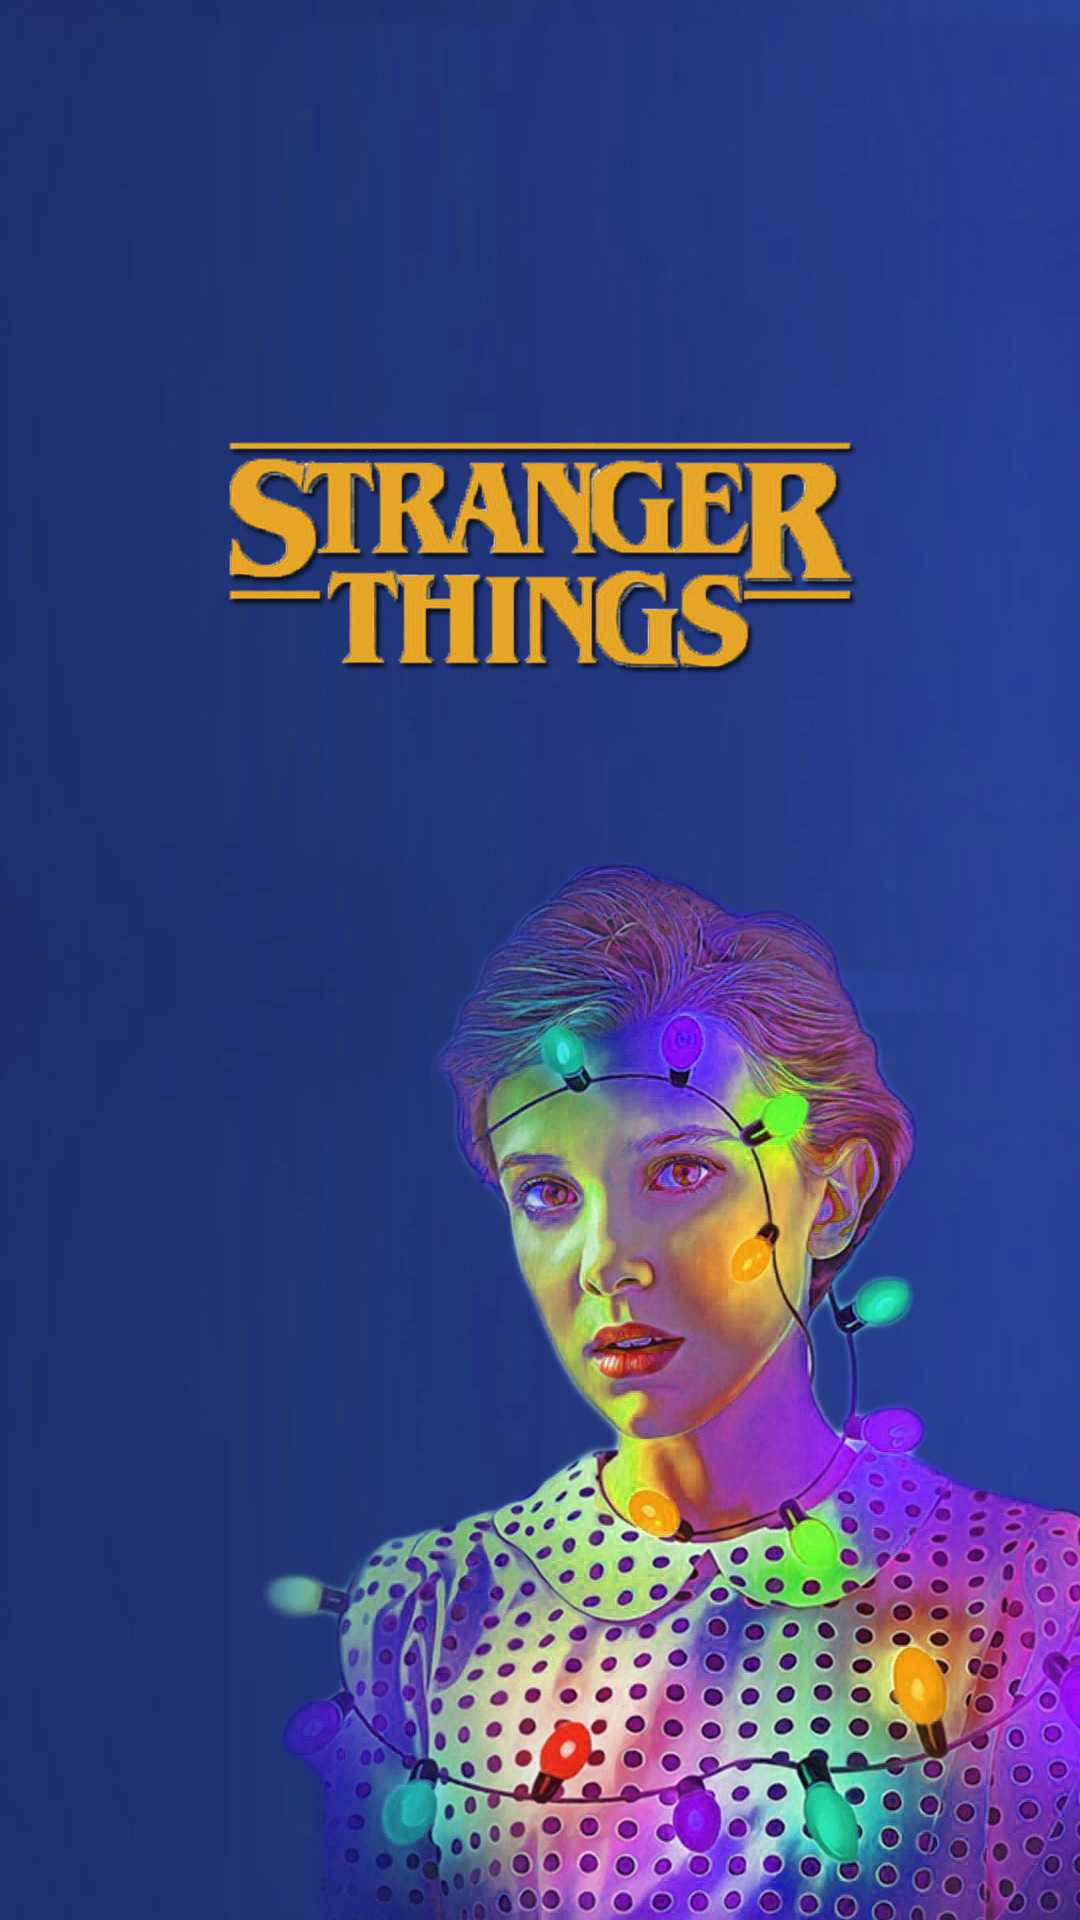 The excitement of the hit Netflix show, Stranger Things, now available on your iPhone Wallpaper